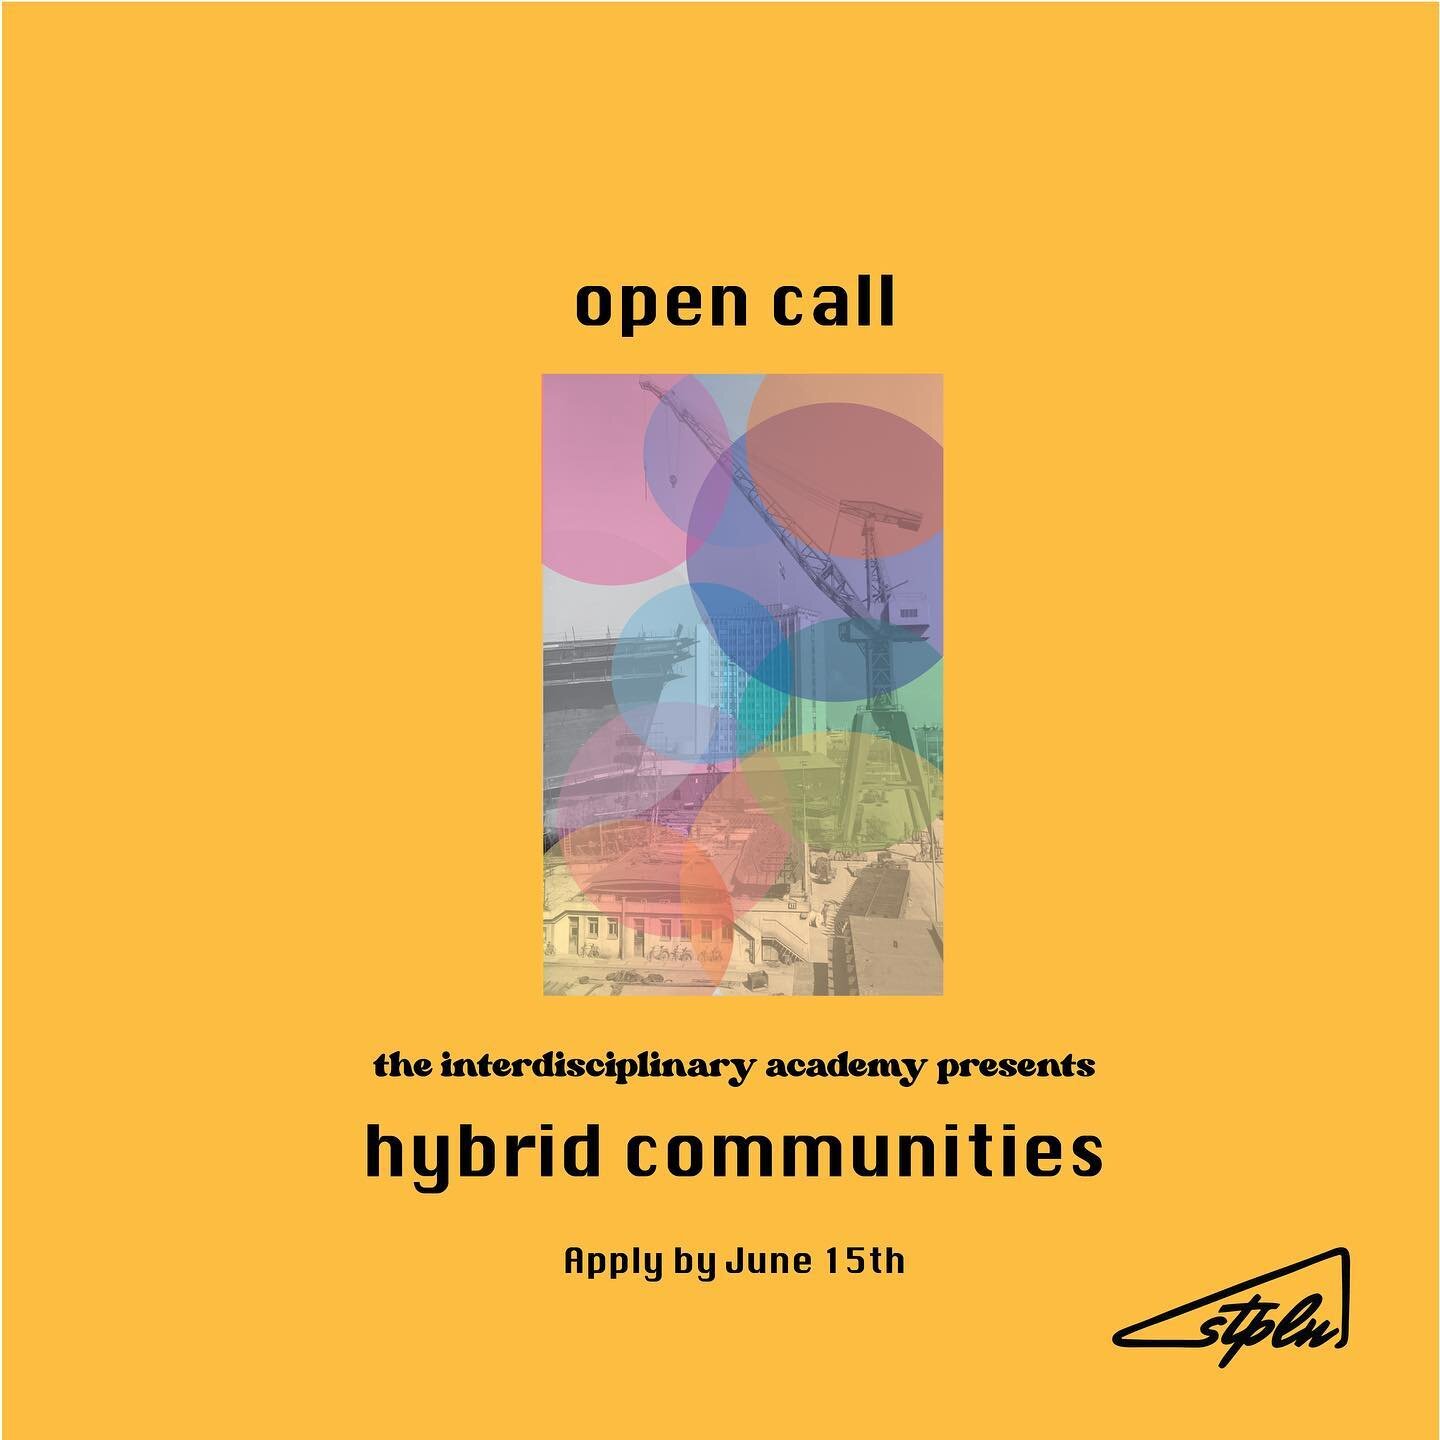 INTERDISCIPLINARY ACADEMY OPEN CALL - HYBRID COMMUNITIES

After a short break, it&rsquo;s that time of year again!

Welcome to apply for this 10 month ESC-program at STPLN, Malm&ouml; Sweden.

We&rsquo;re looking for 3 international young creatives u